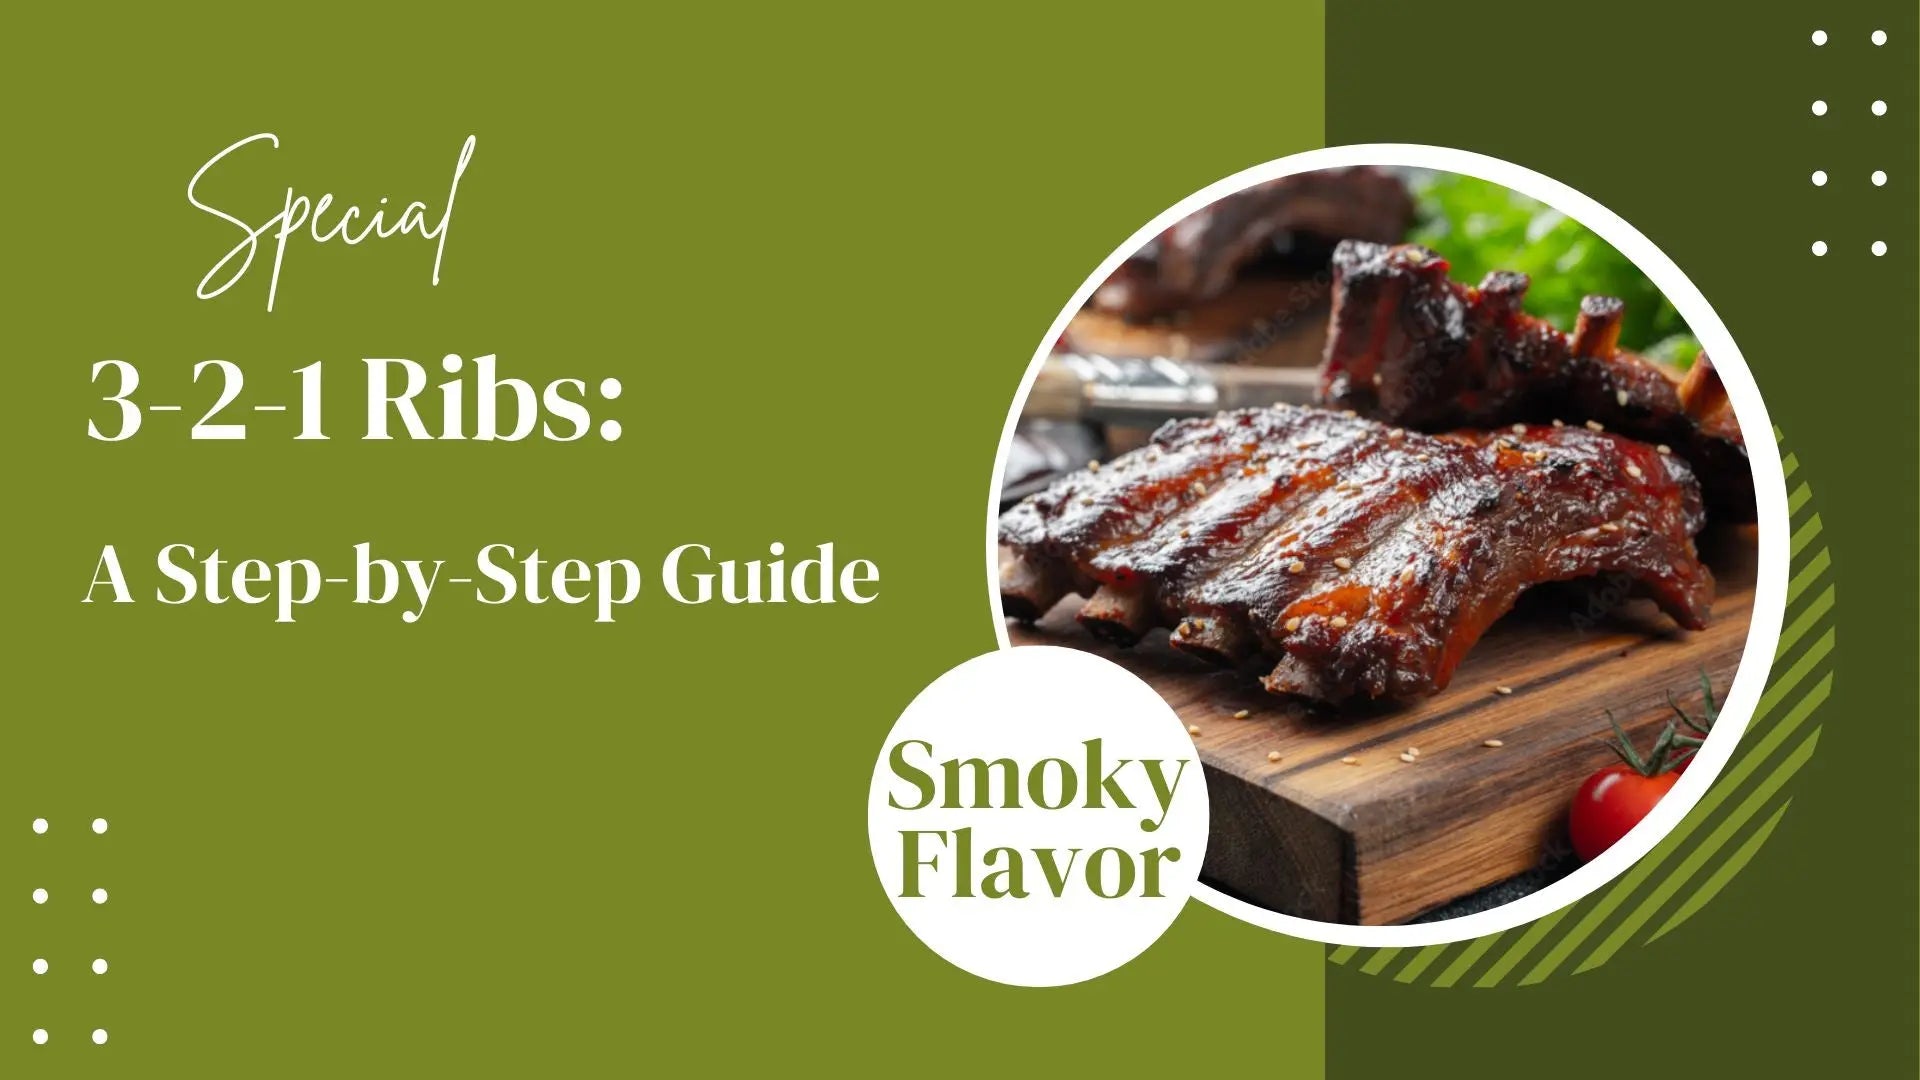 3-2-1 Ribs: A Step-by-Step Guide